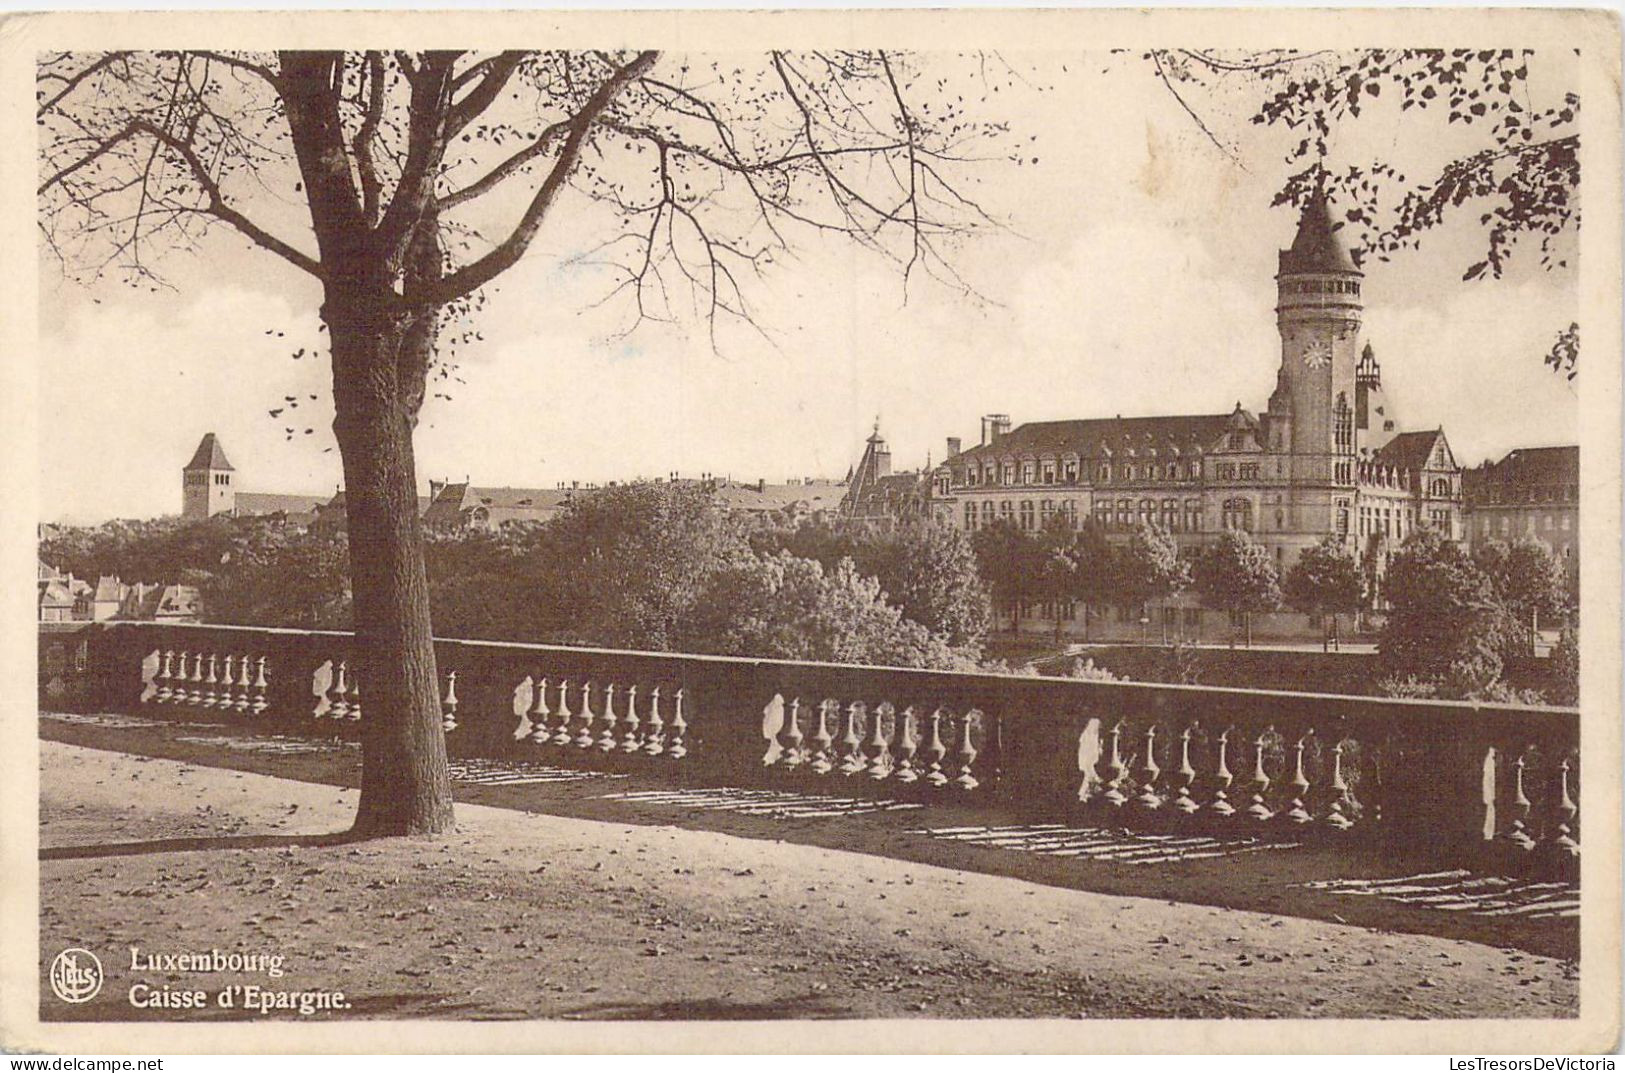 LUXEMBOURG - Caisse D'Epargne - Carte Postale Ancienne - Luxemburg - Town